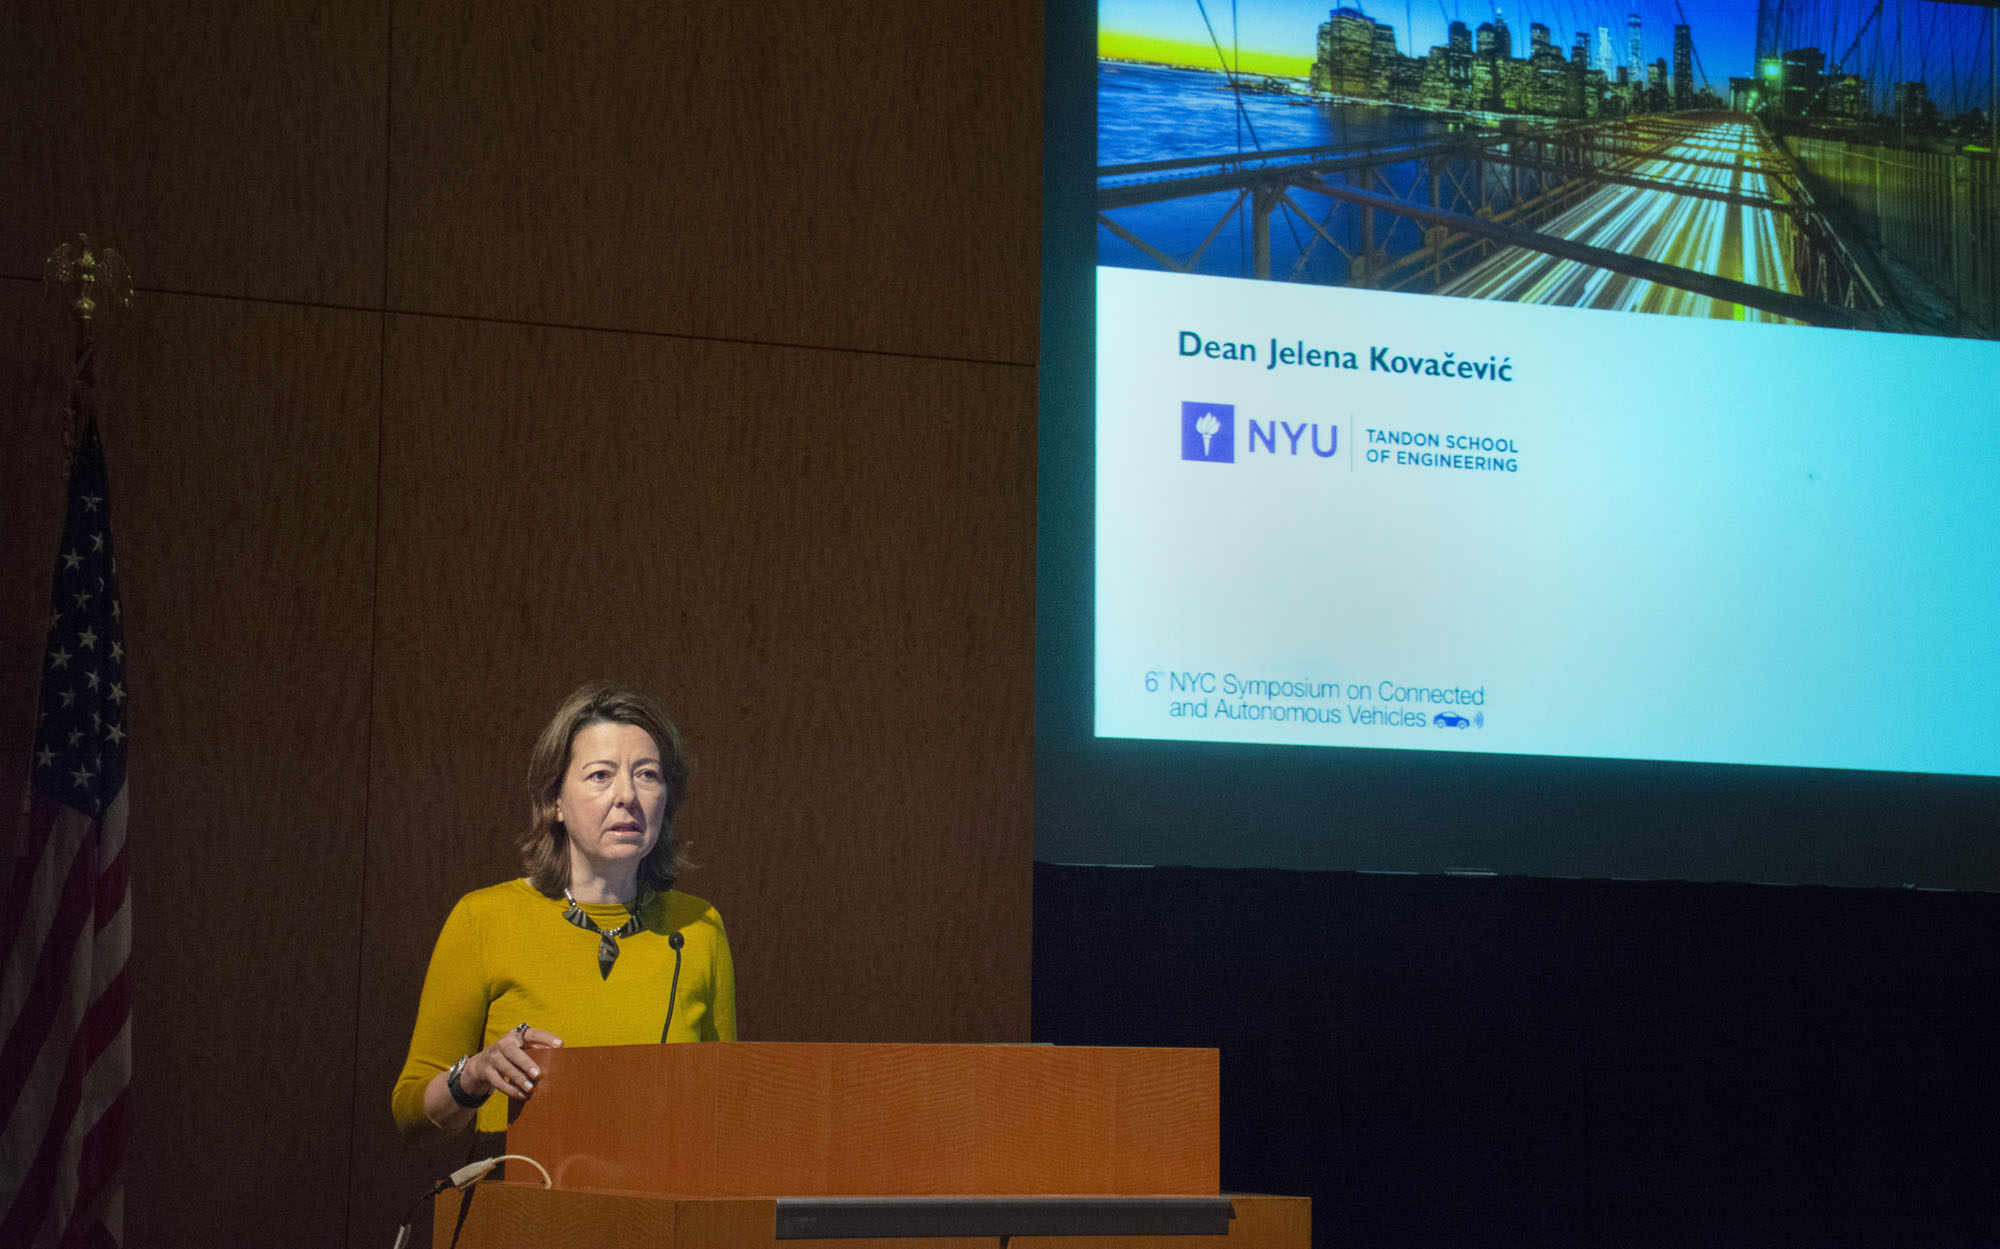 NYU Tandon Dean Jelena Kovacevic welcomes attendees at the beginning of the two-day symposium.